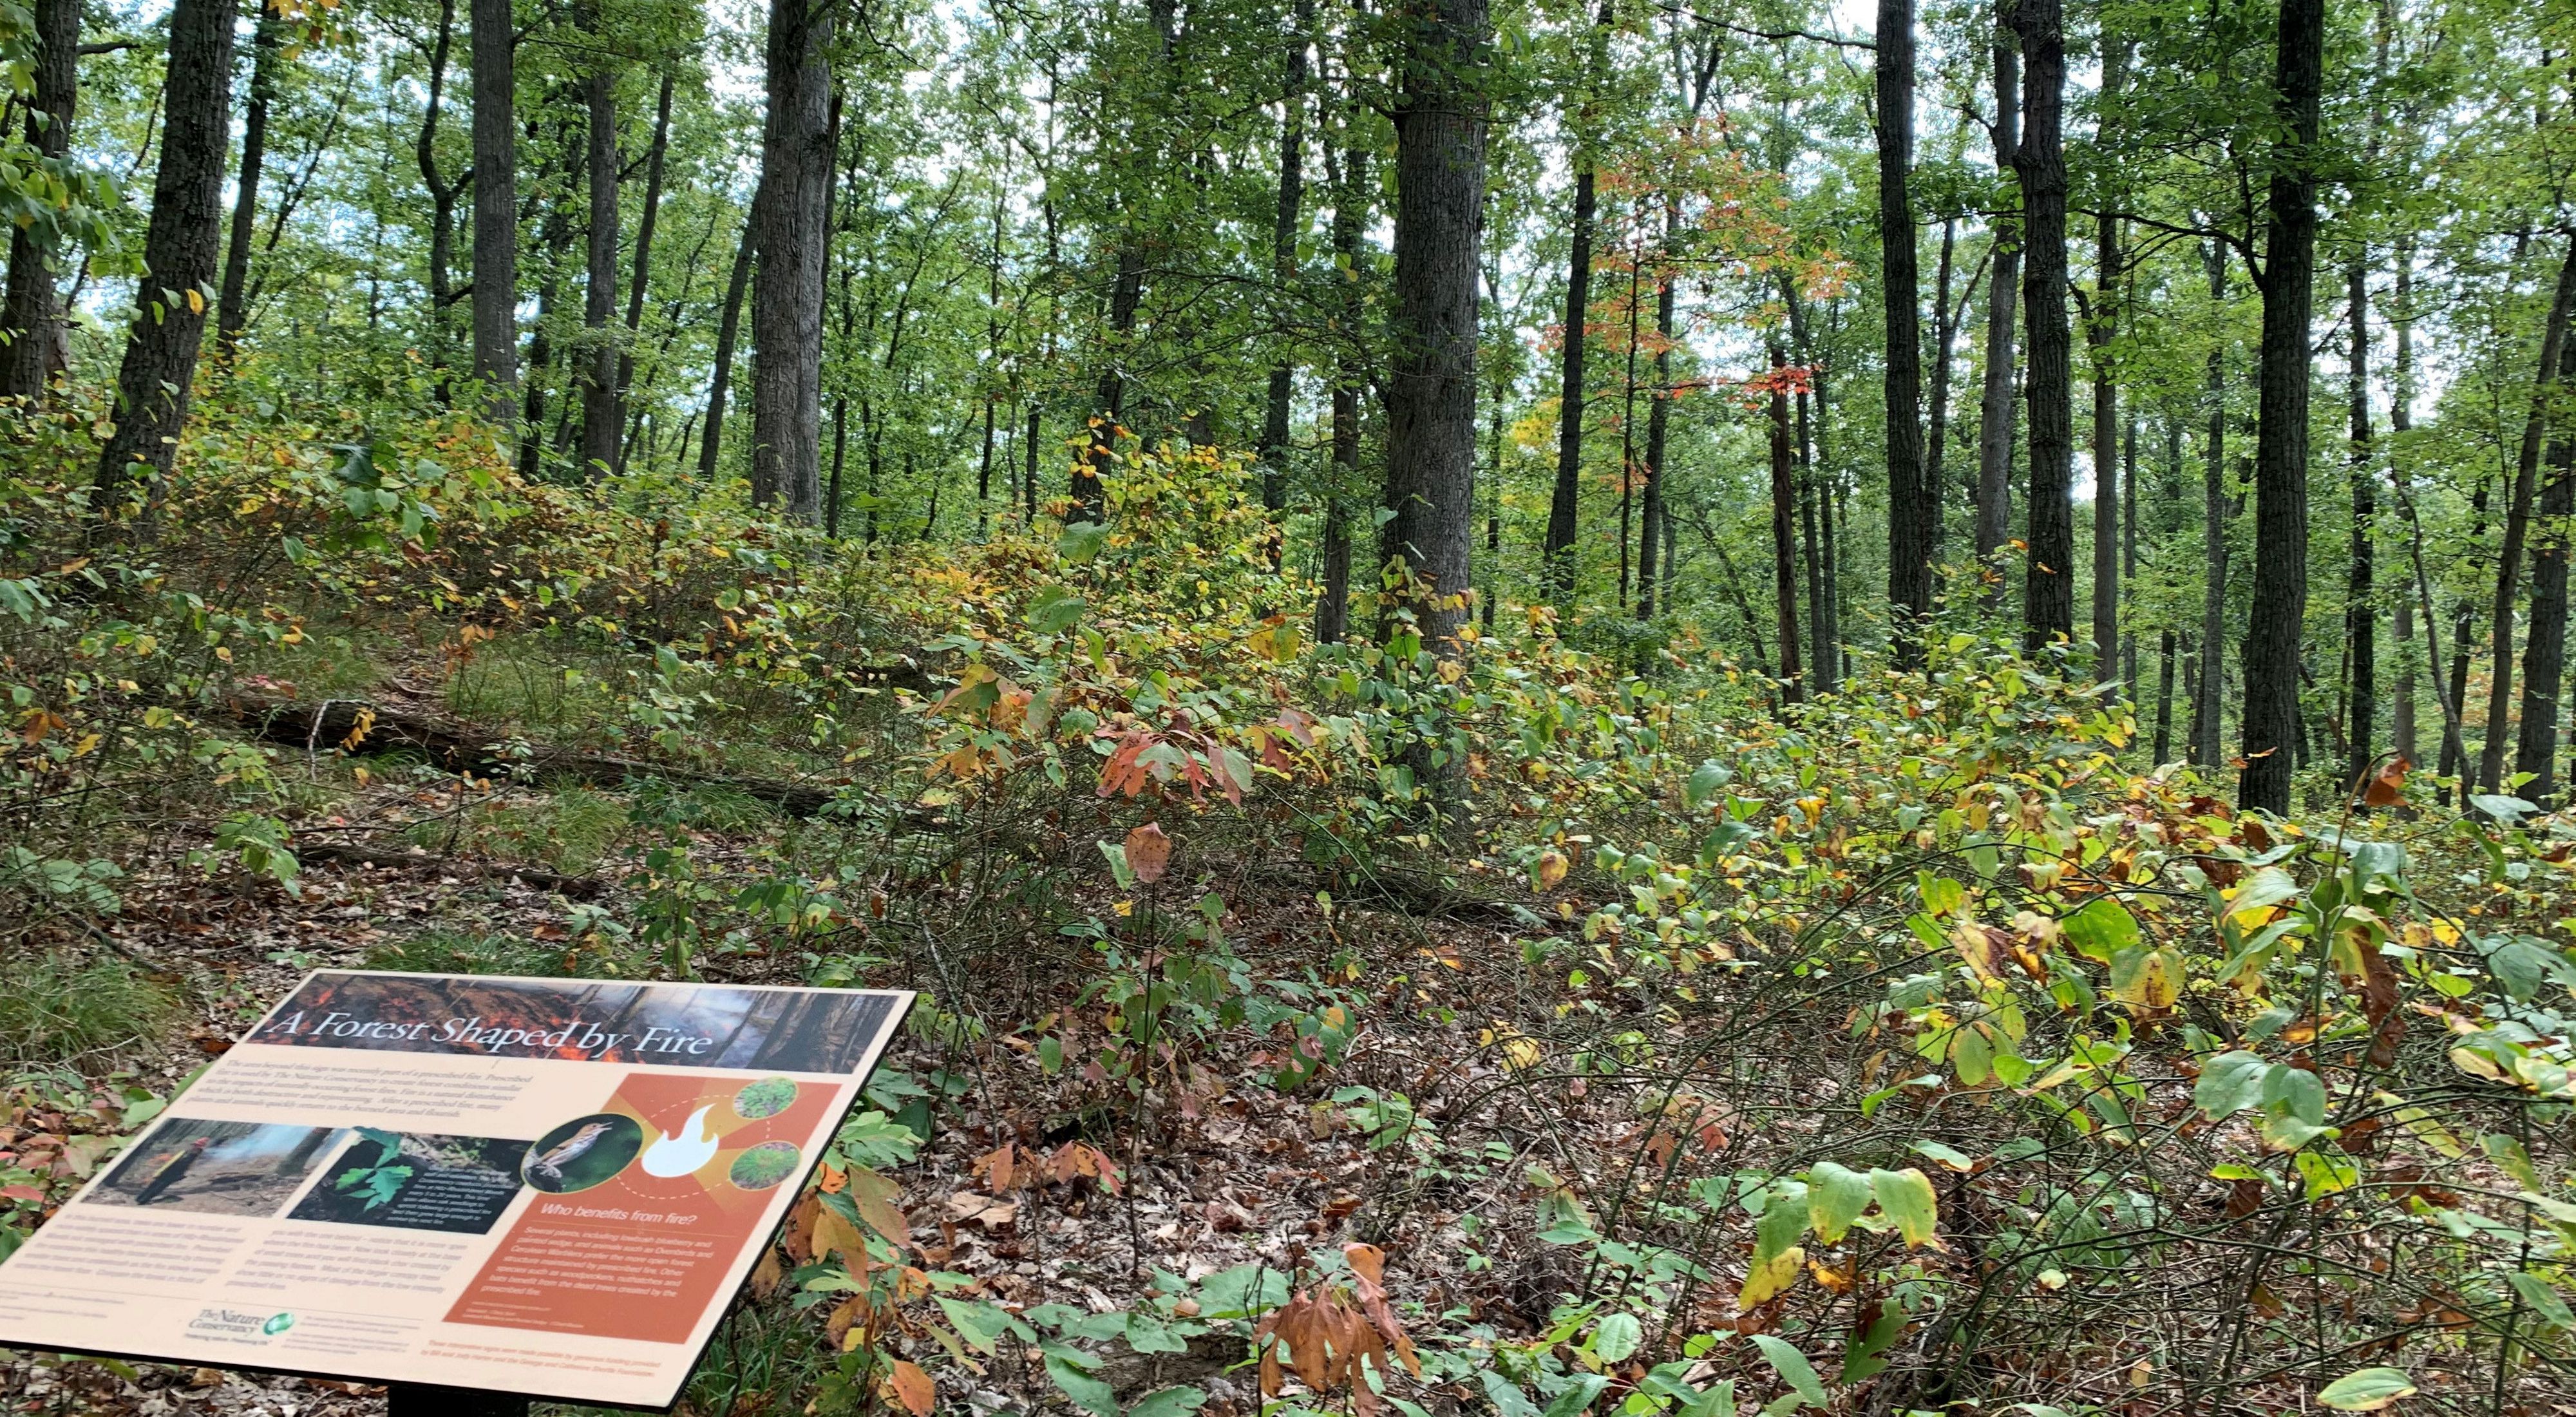 Interpretive sign in forest in early autumn.